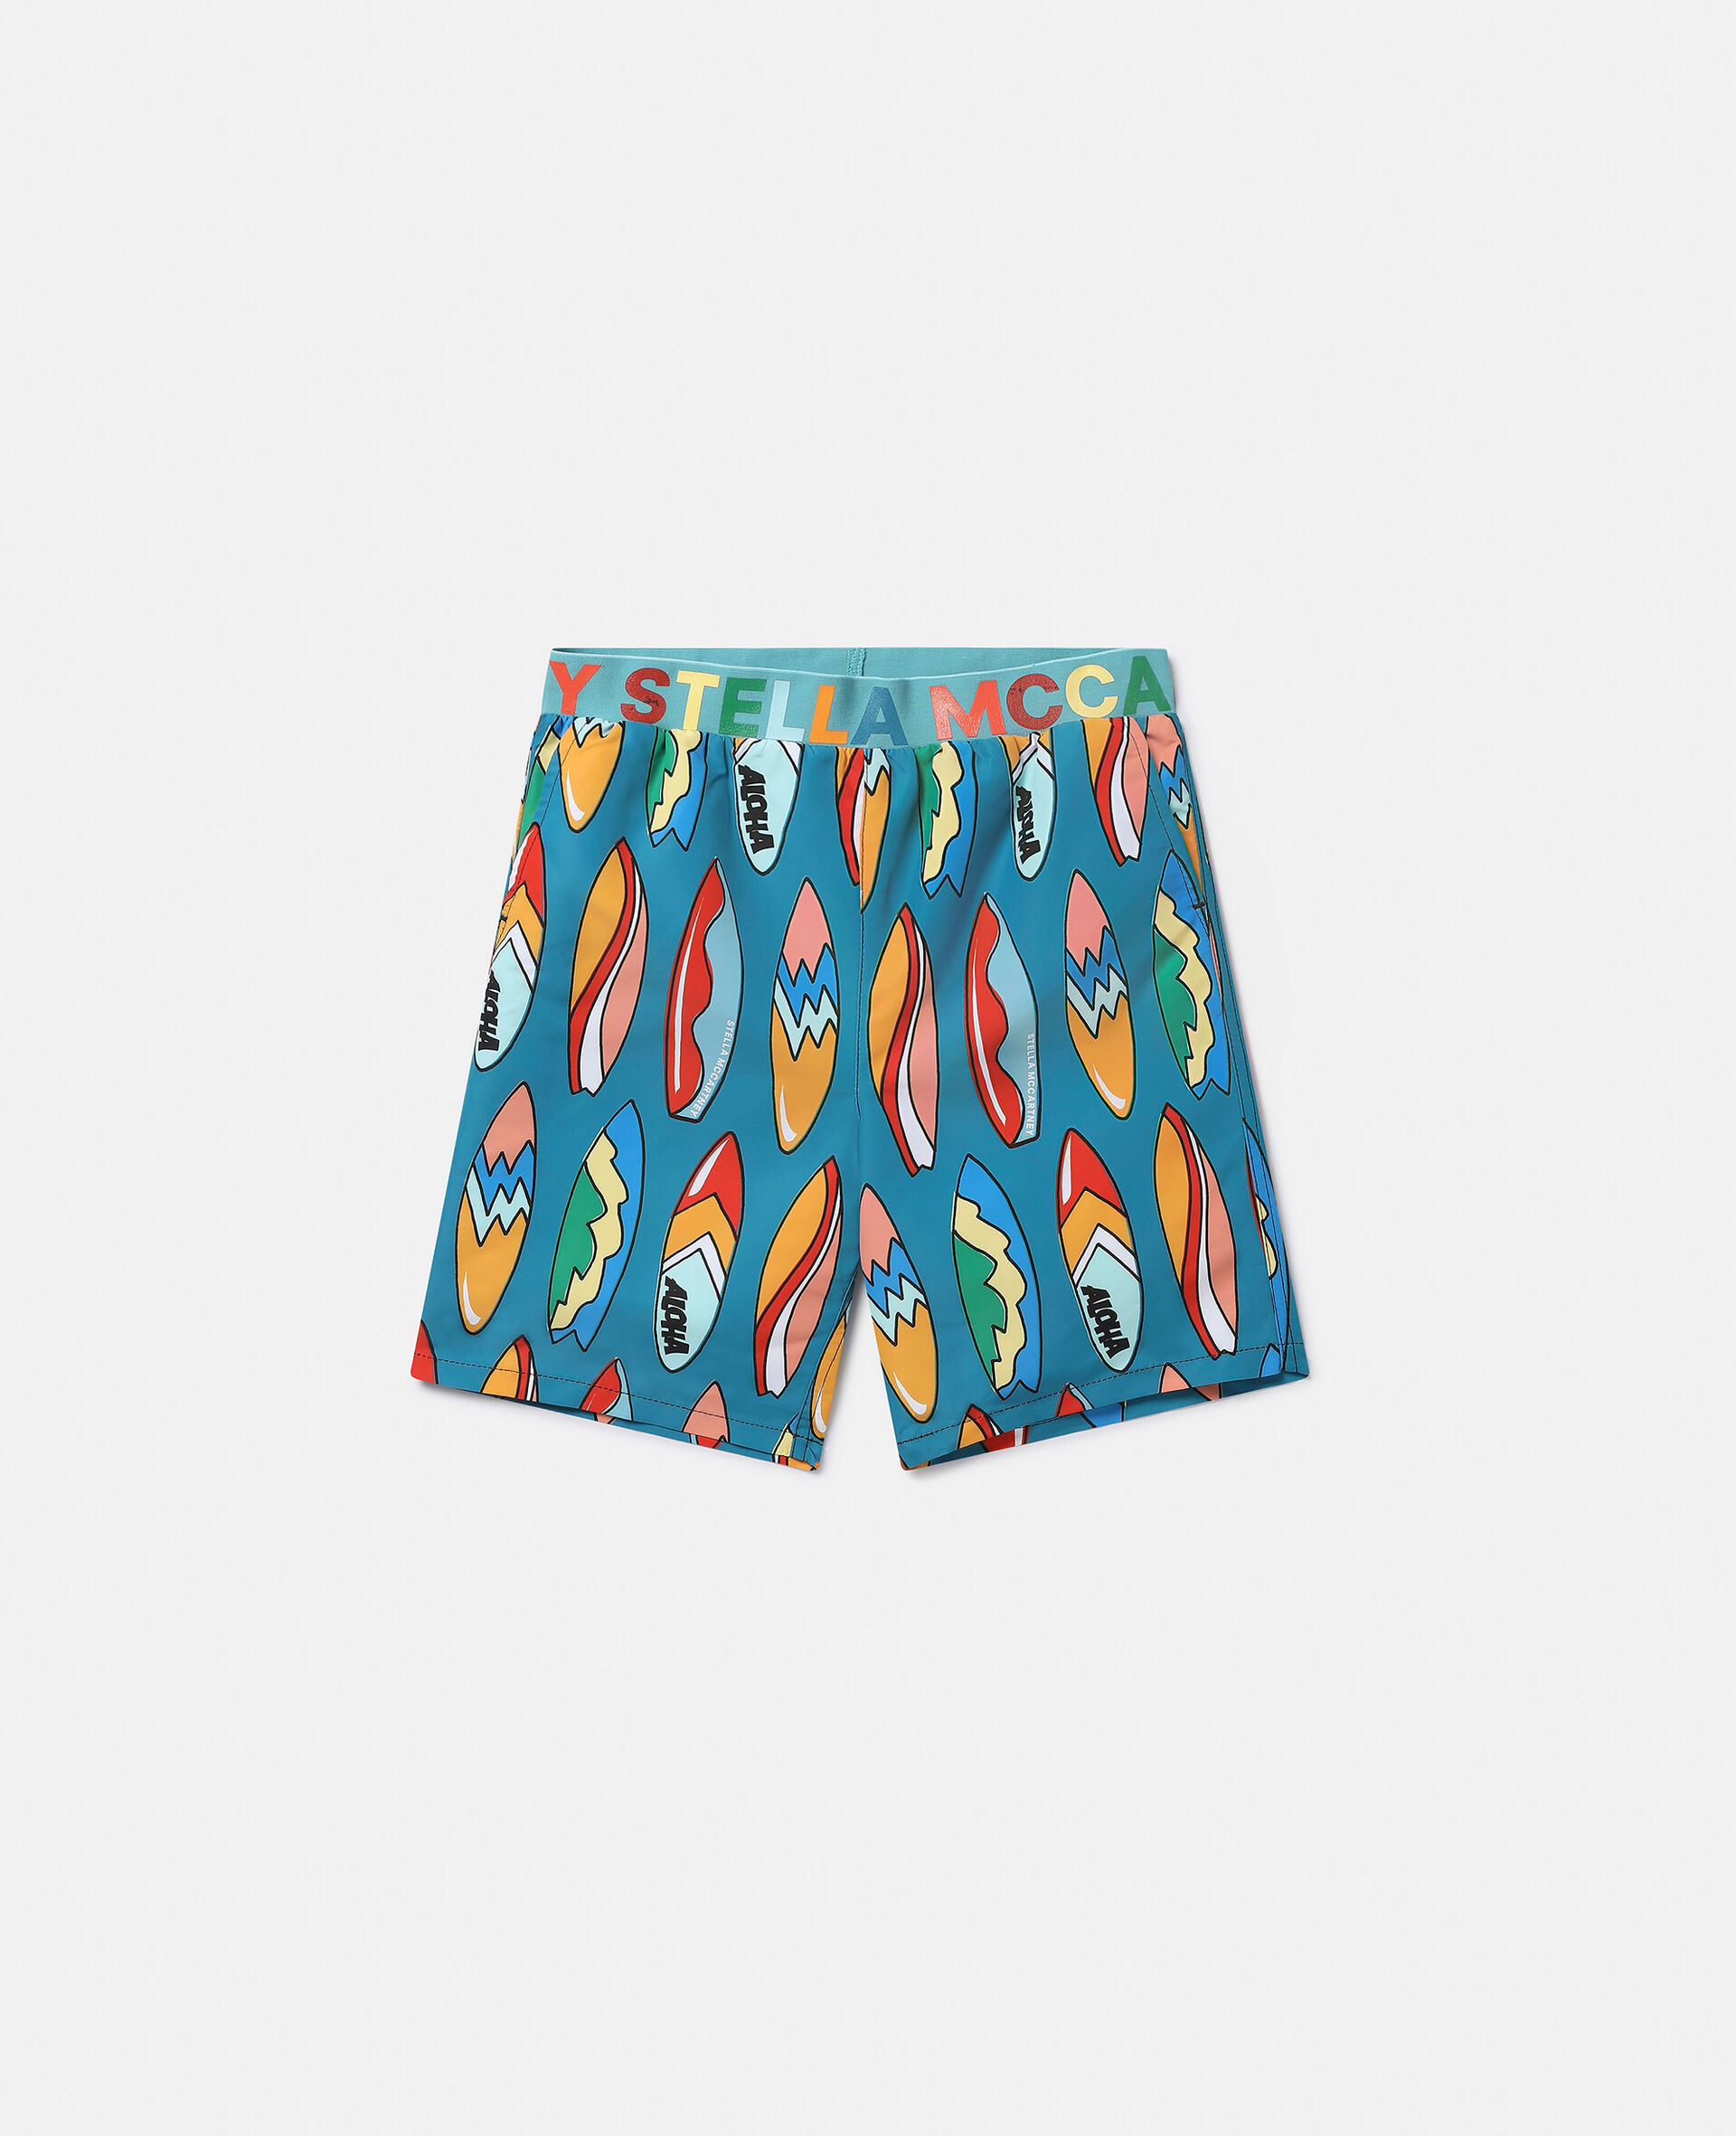 Surfboard Print Swimming Trunks-Fantaisie-large image number 0